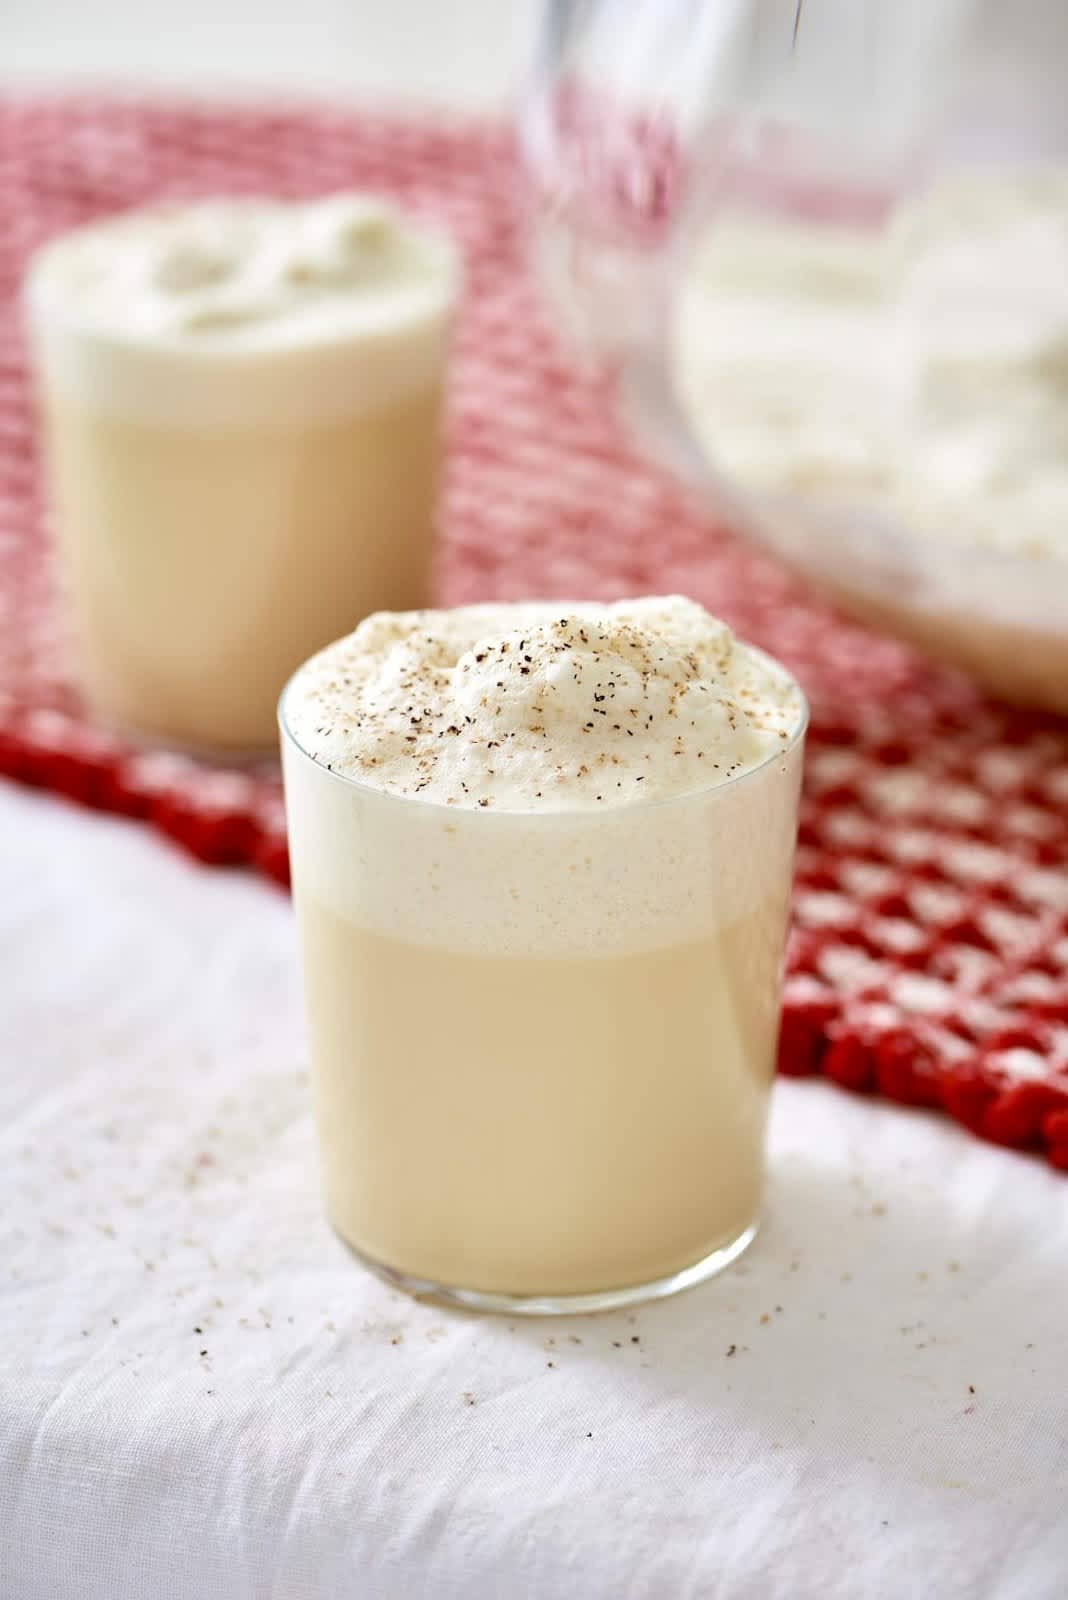 Rocks glass filled with homemade spiked eggnog  